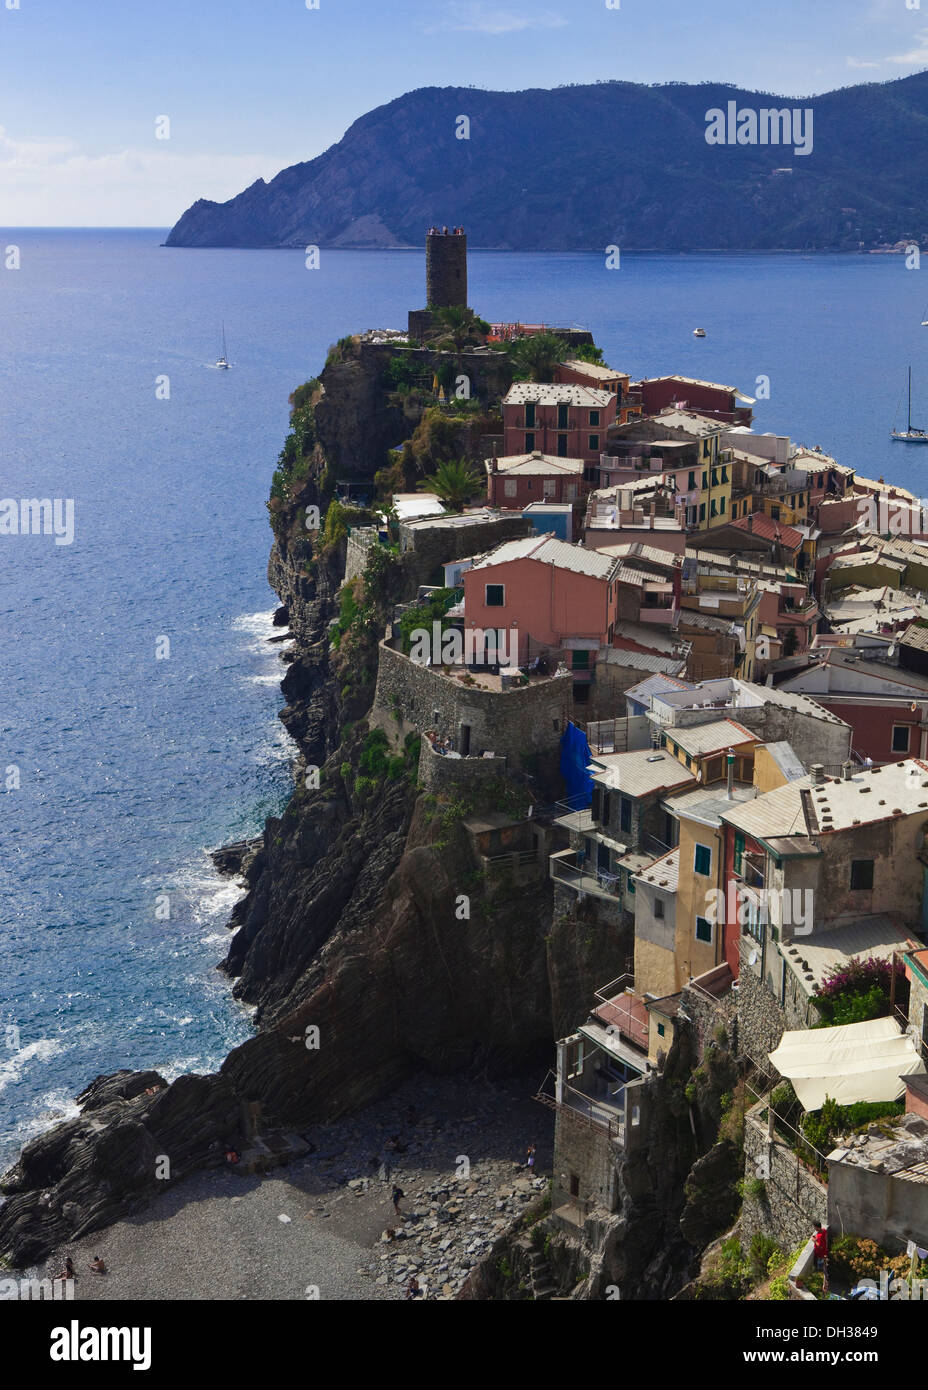 A view of the town and bay of Vernazza, Cinque Terre, Italy Stock Photo